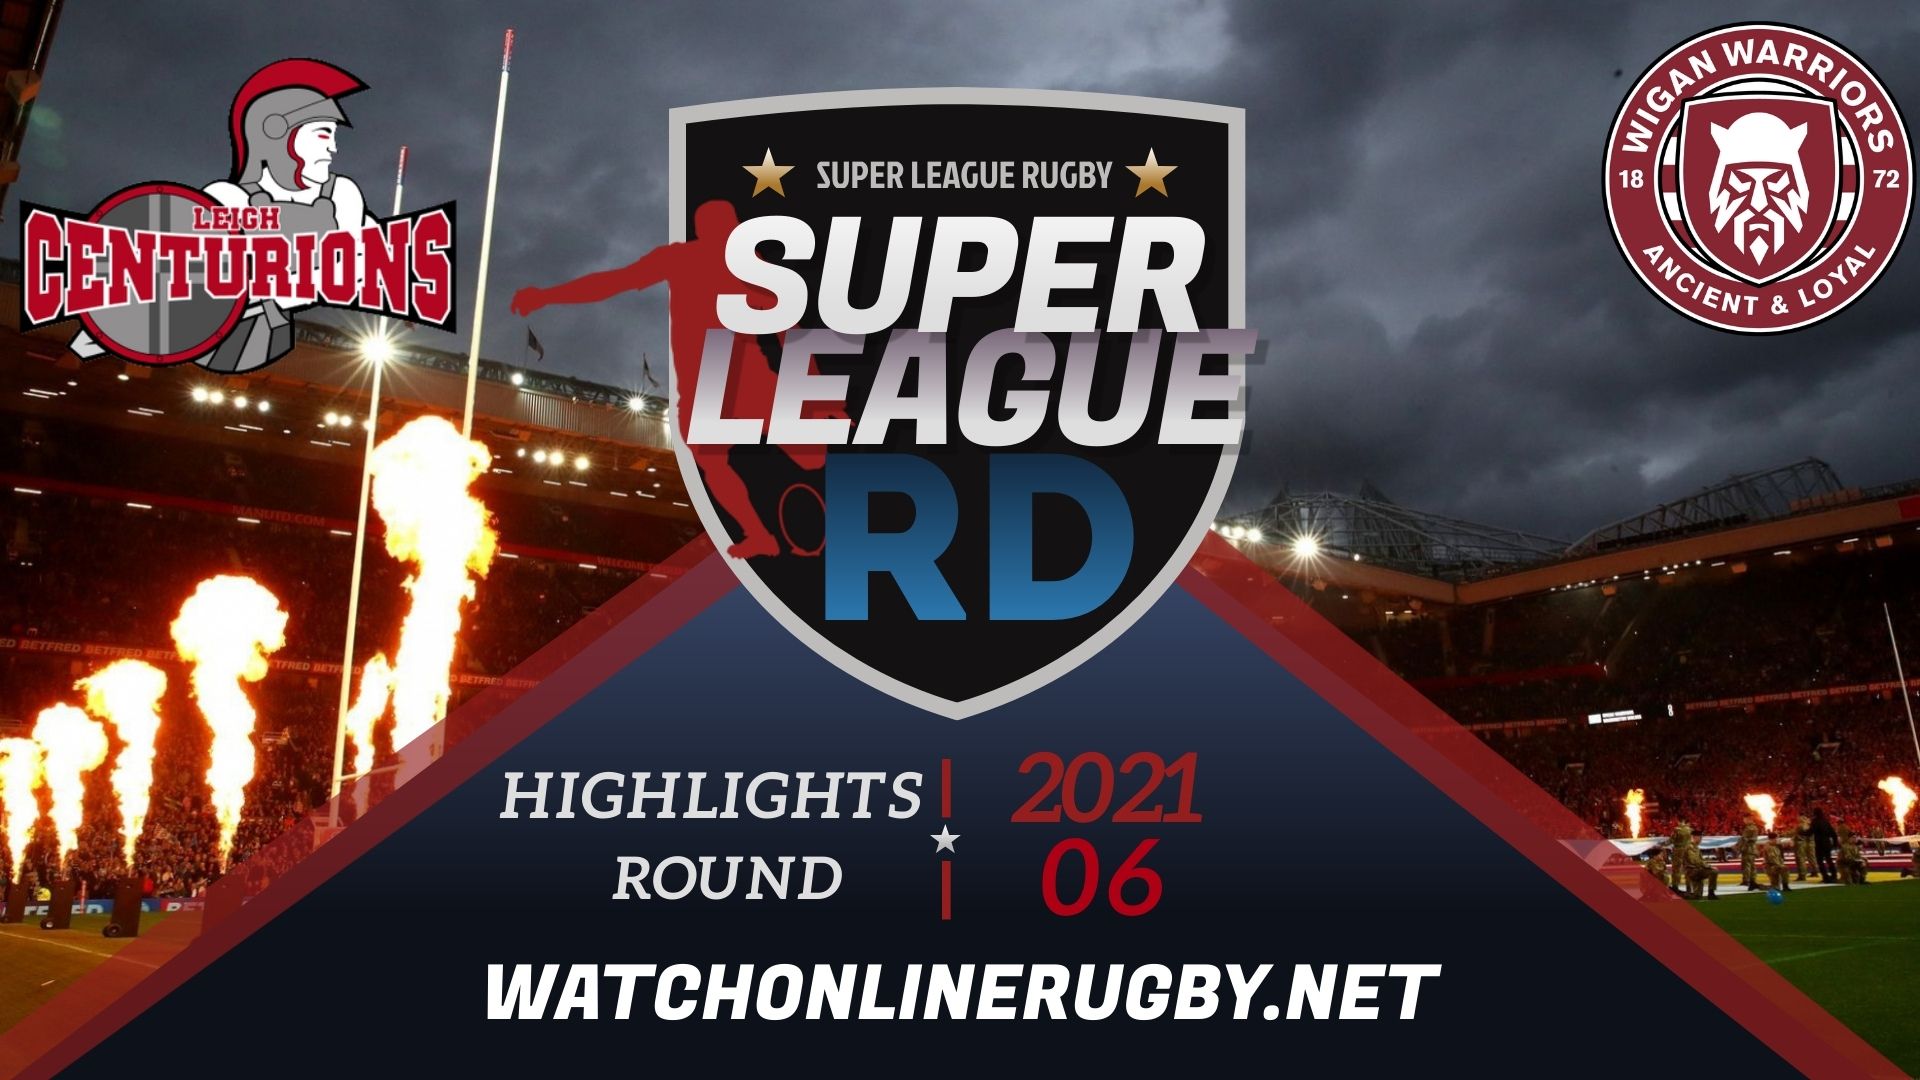 Leigh Centurions Vs Wigan Warriors Super League Rugby 2021 RD 6